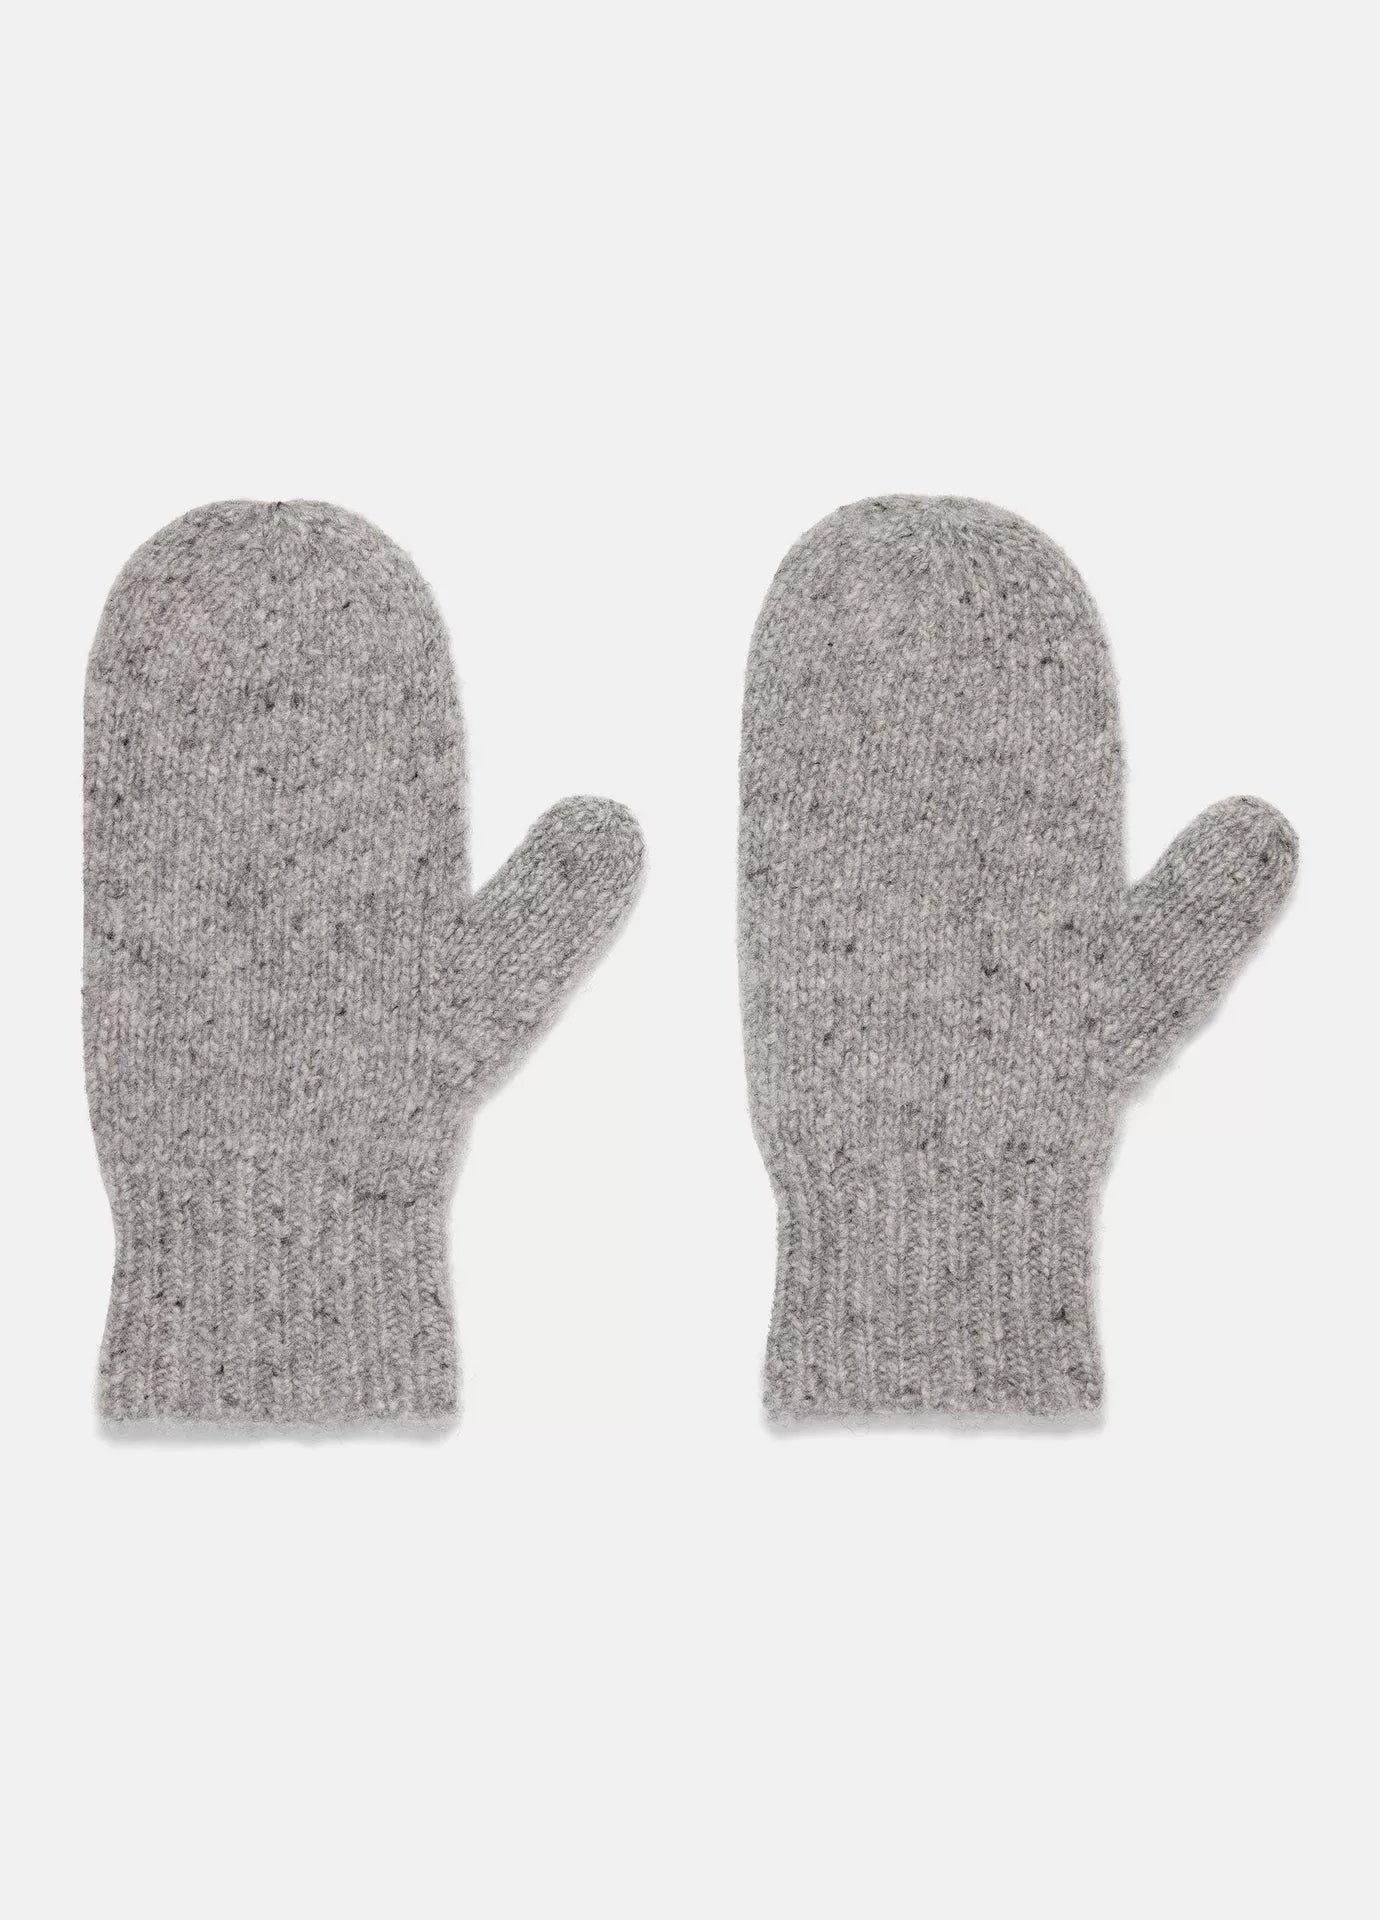 Vince Cashmere Donegal Mitten, cashmere mittens, mittens, Winter Accessories, cold weather essentials, women's clothing